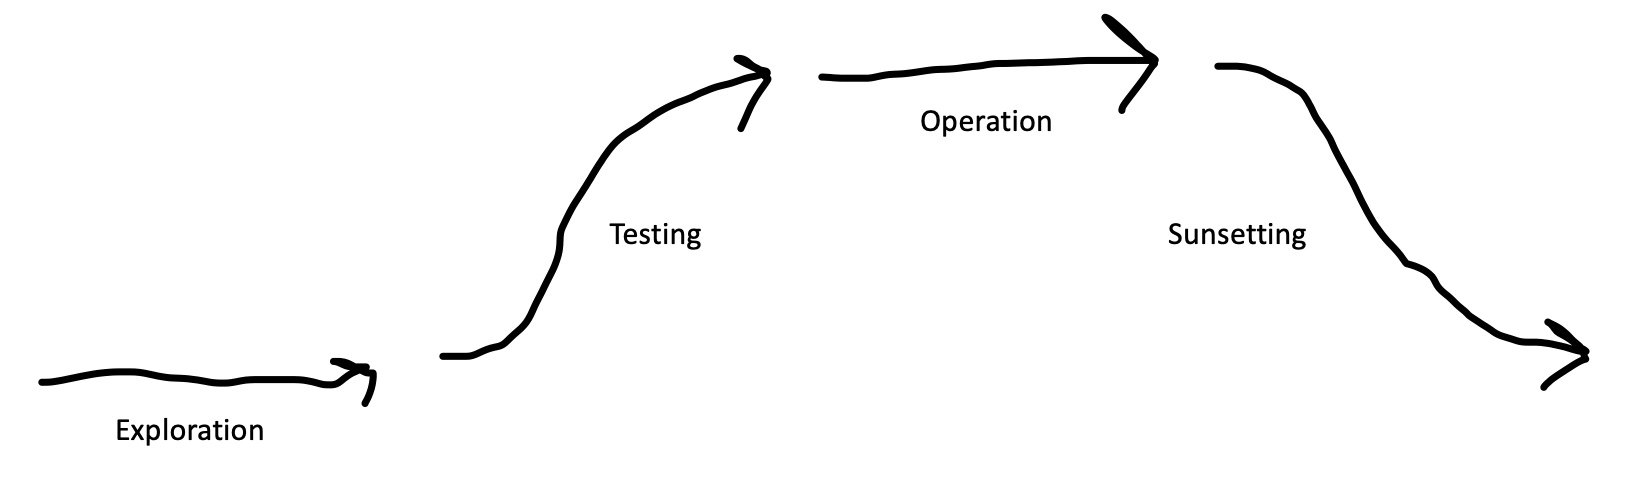 hand-drawn diagram of the lifecycle of an idea: exploration, testing, operation, sunsetting